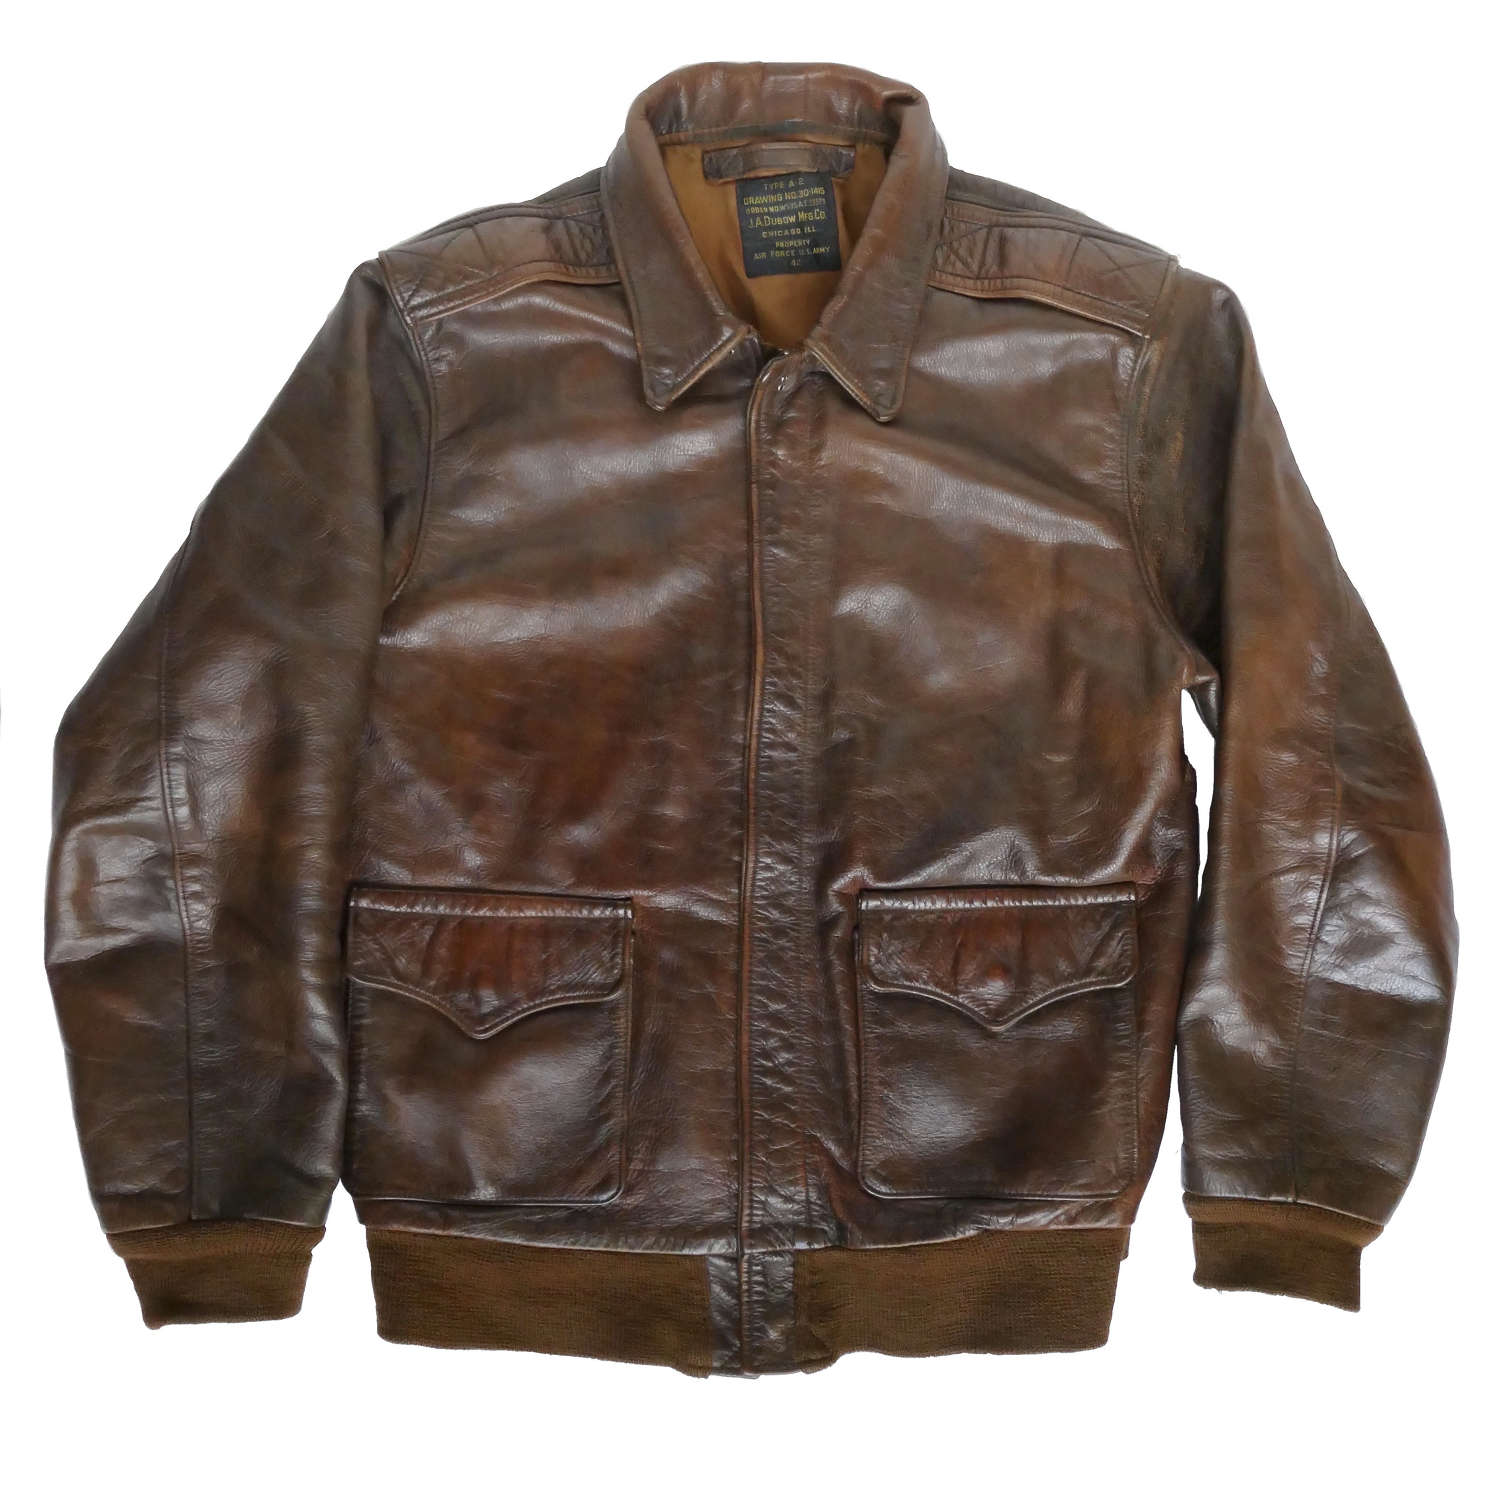 USAAF A-2 flying jacket - Diamond Clothing reproduction